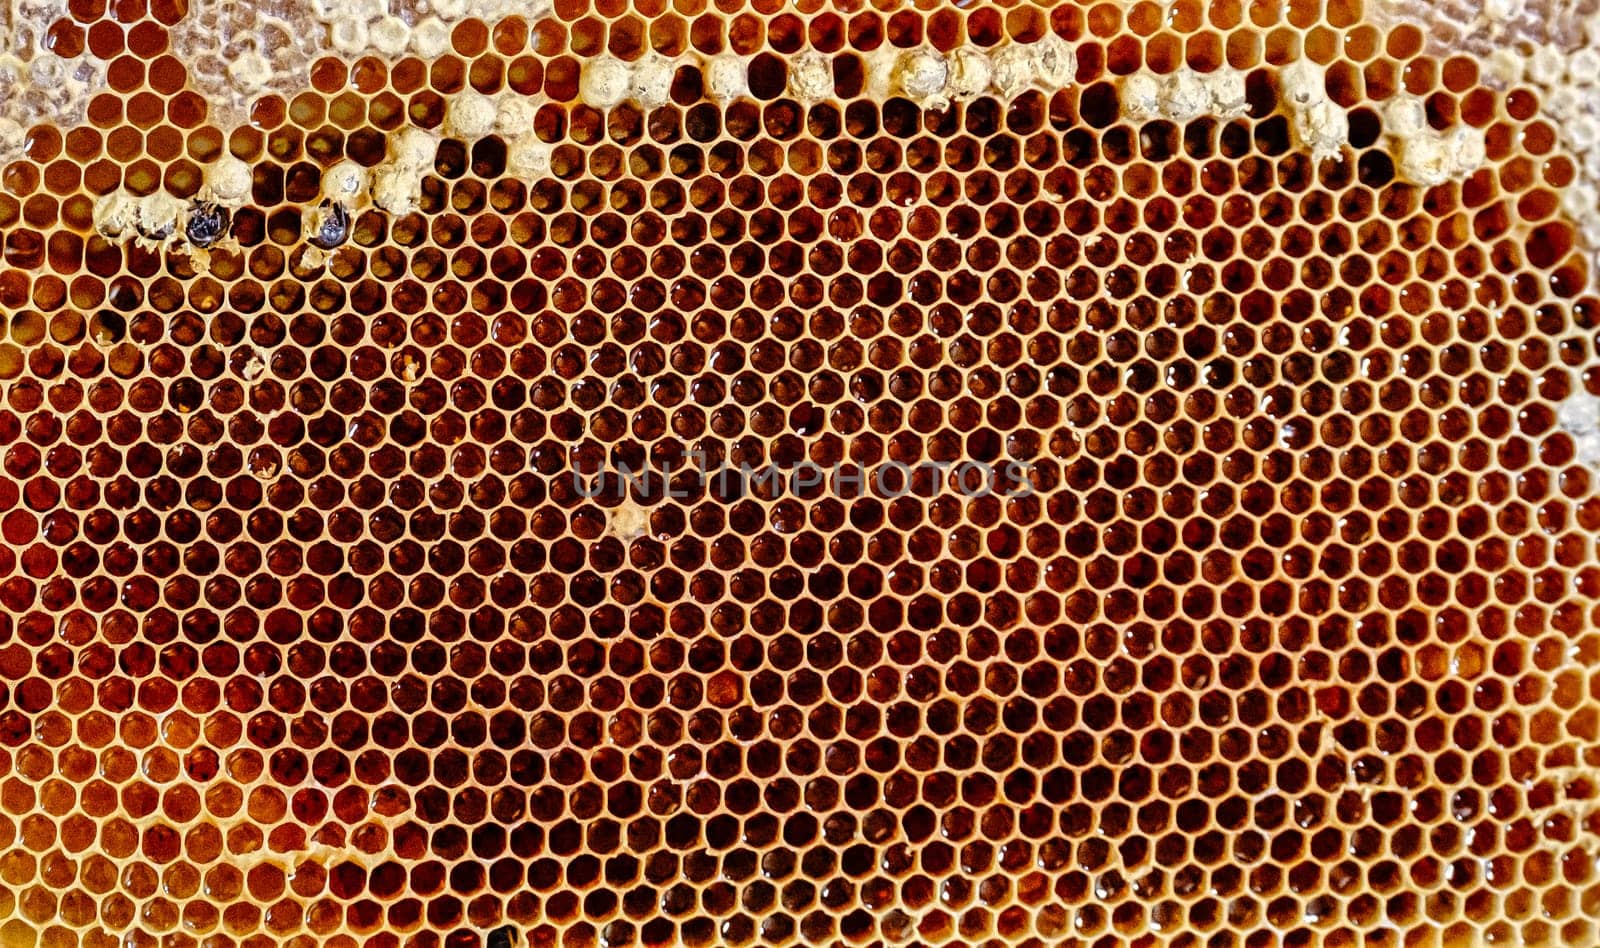 Honeycomb. Photo of honey cells filled with fresh honey. Concept of beekeeping. download photo